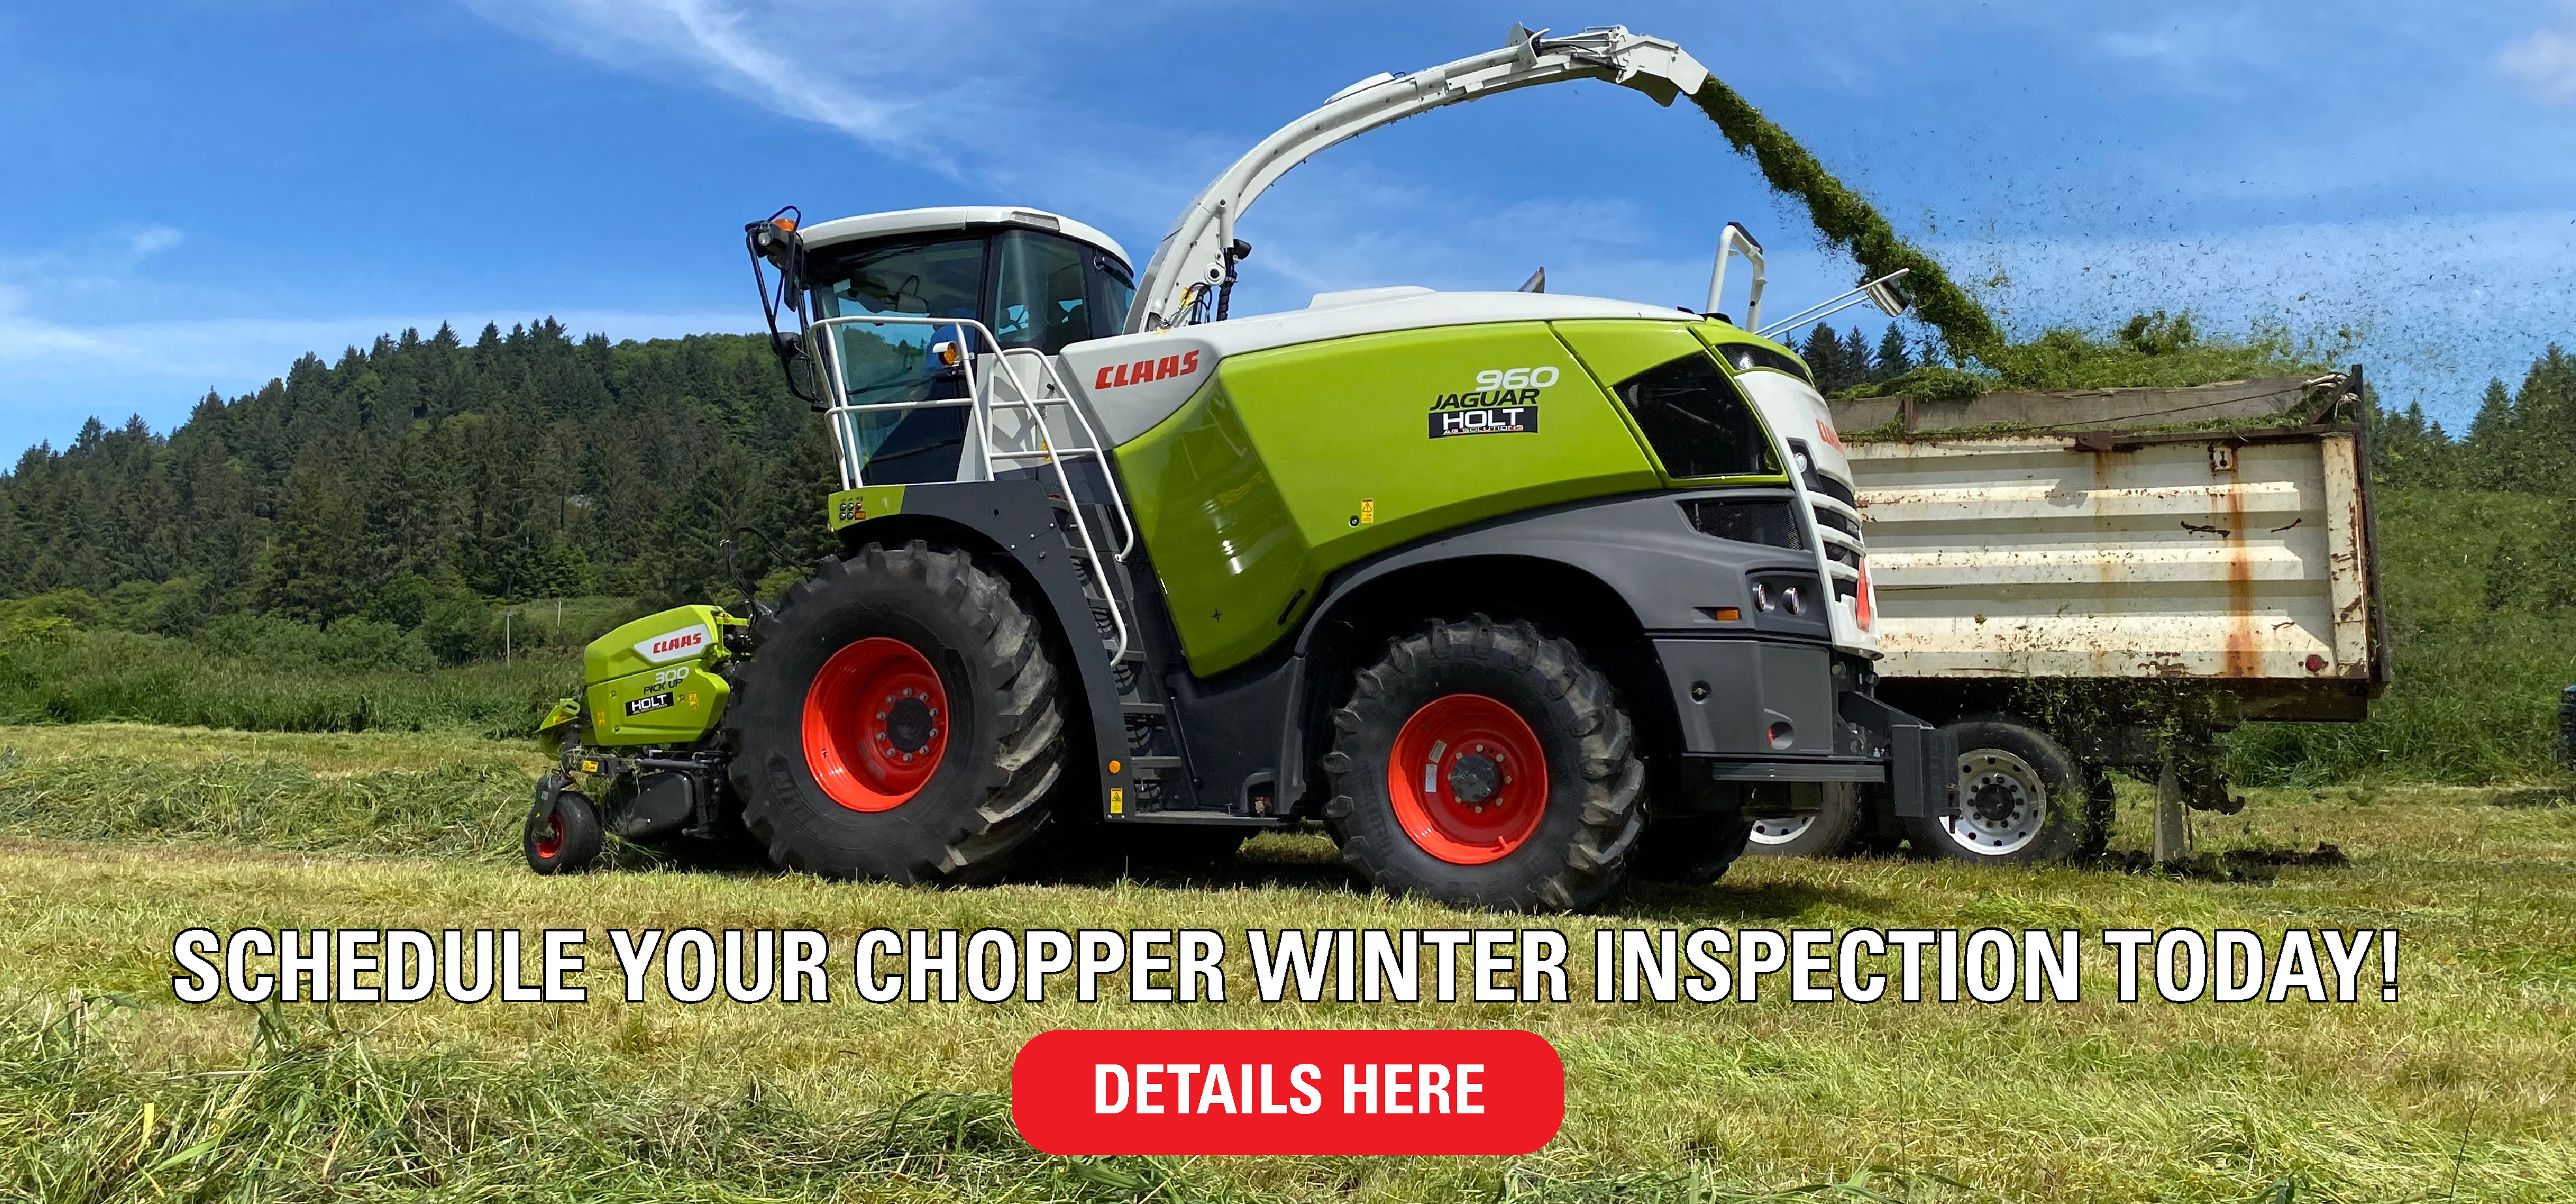 Chopper Winter Inspection Special